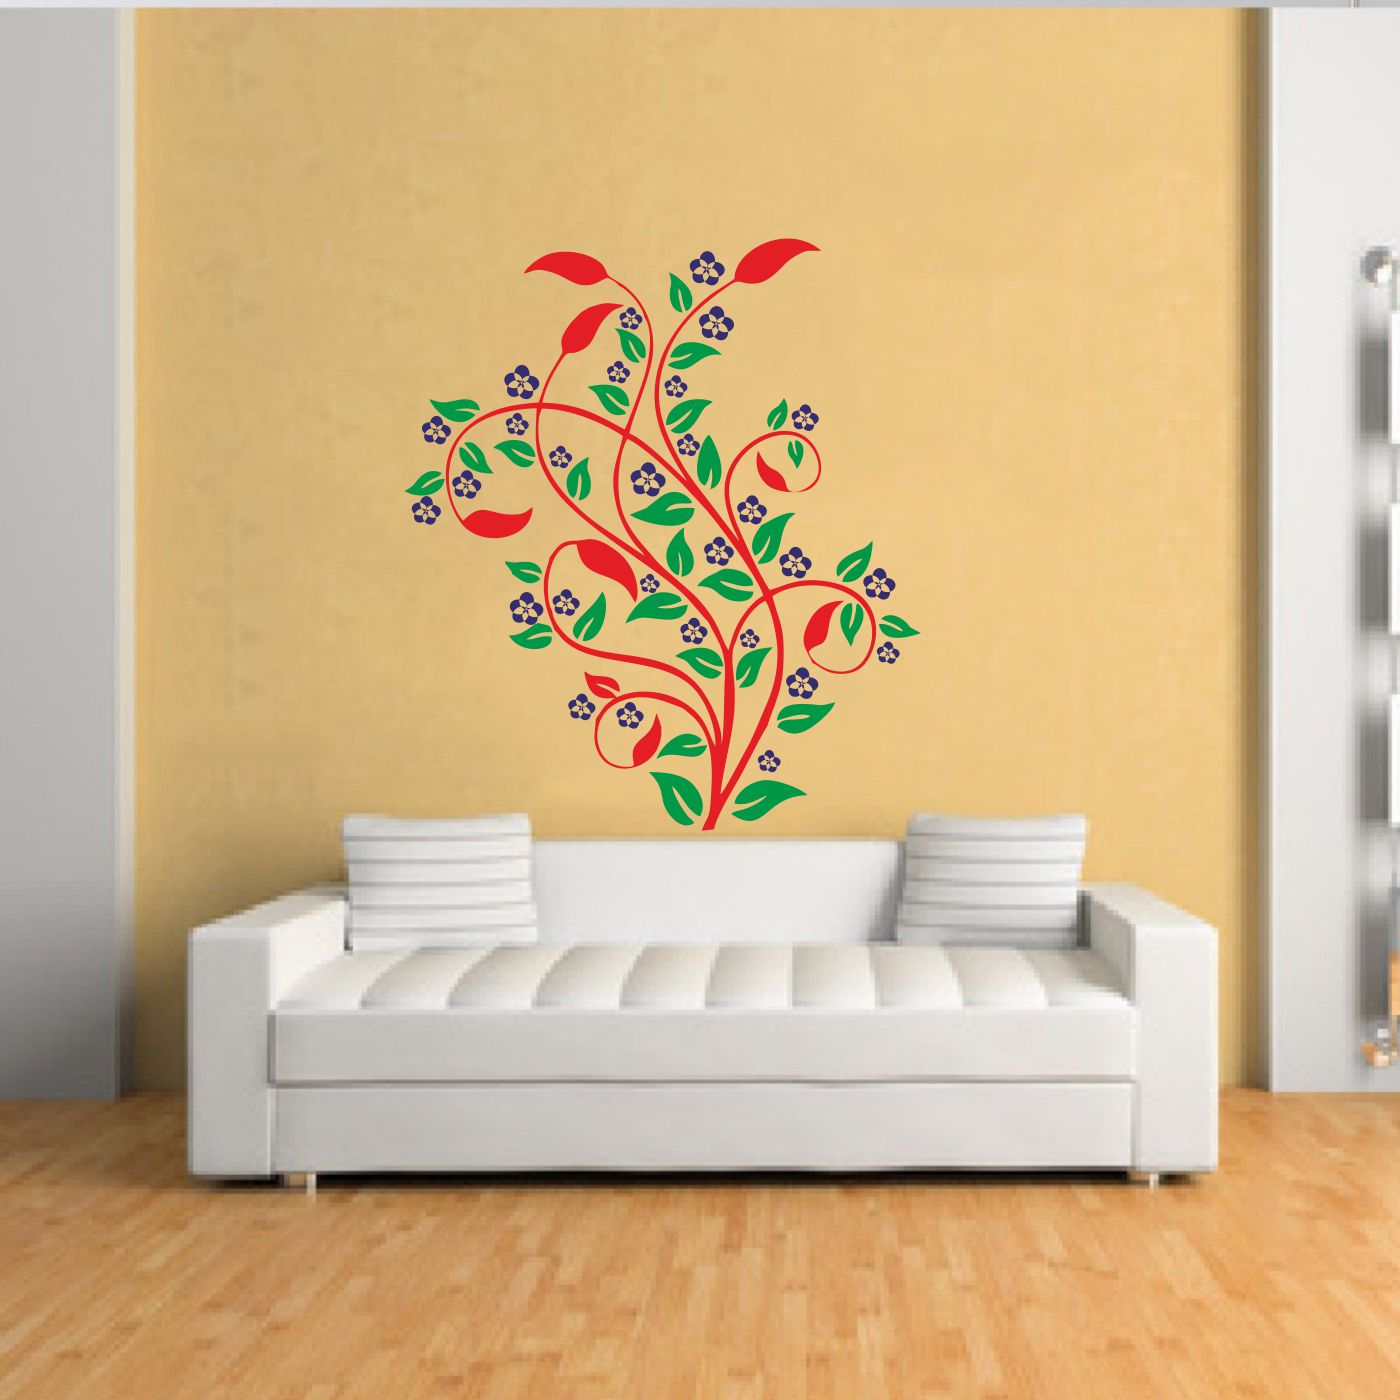 ORKA Nature Wall Decal Sticker 29  